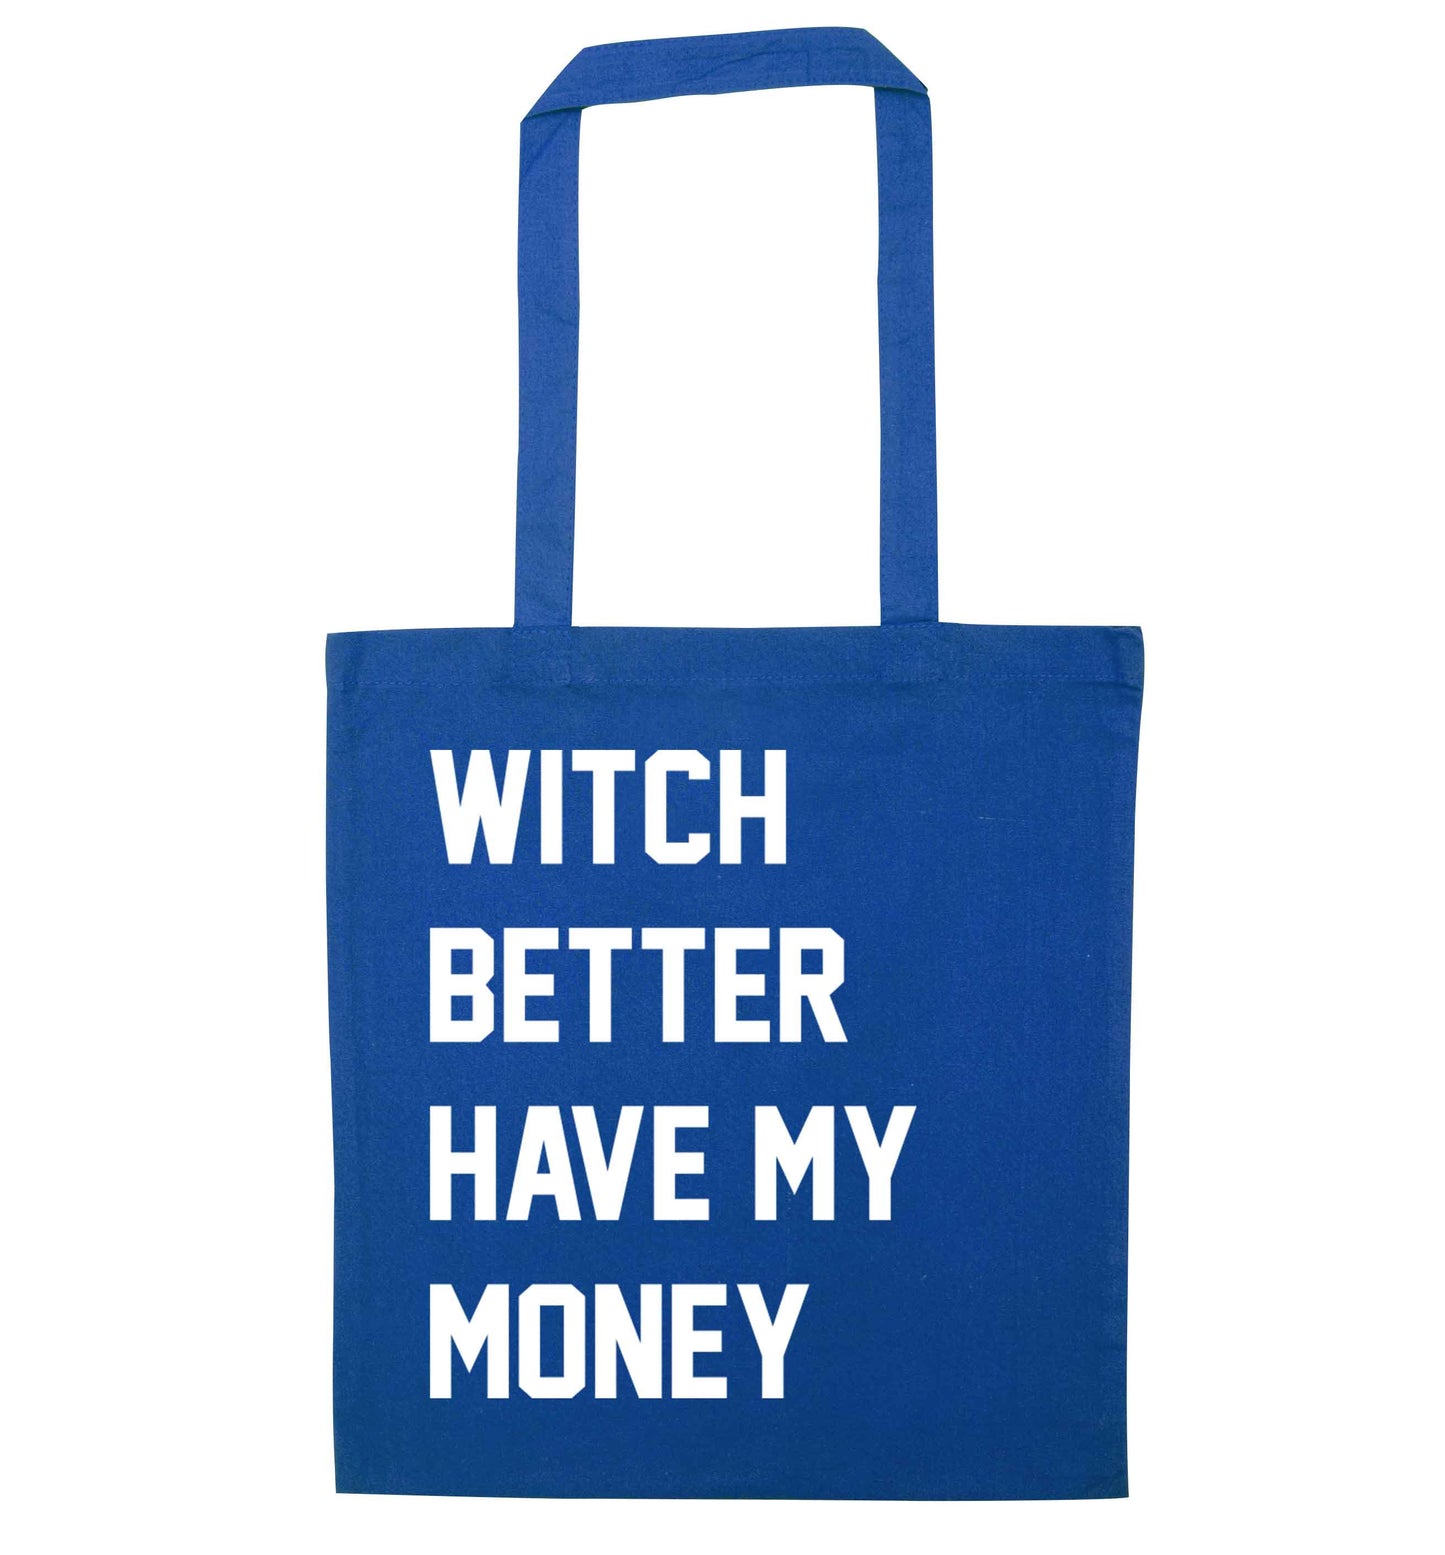 Witch better have my money blue tote bag